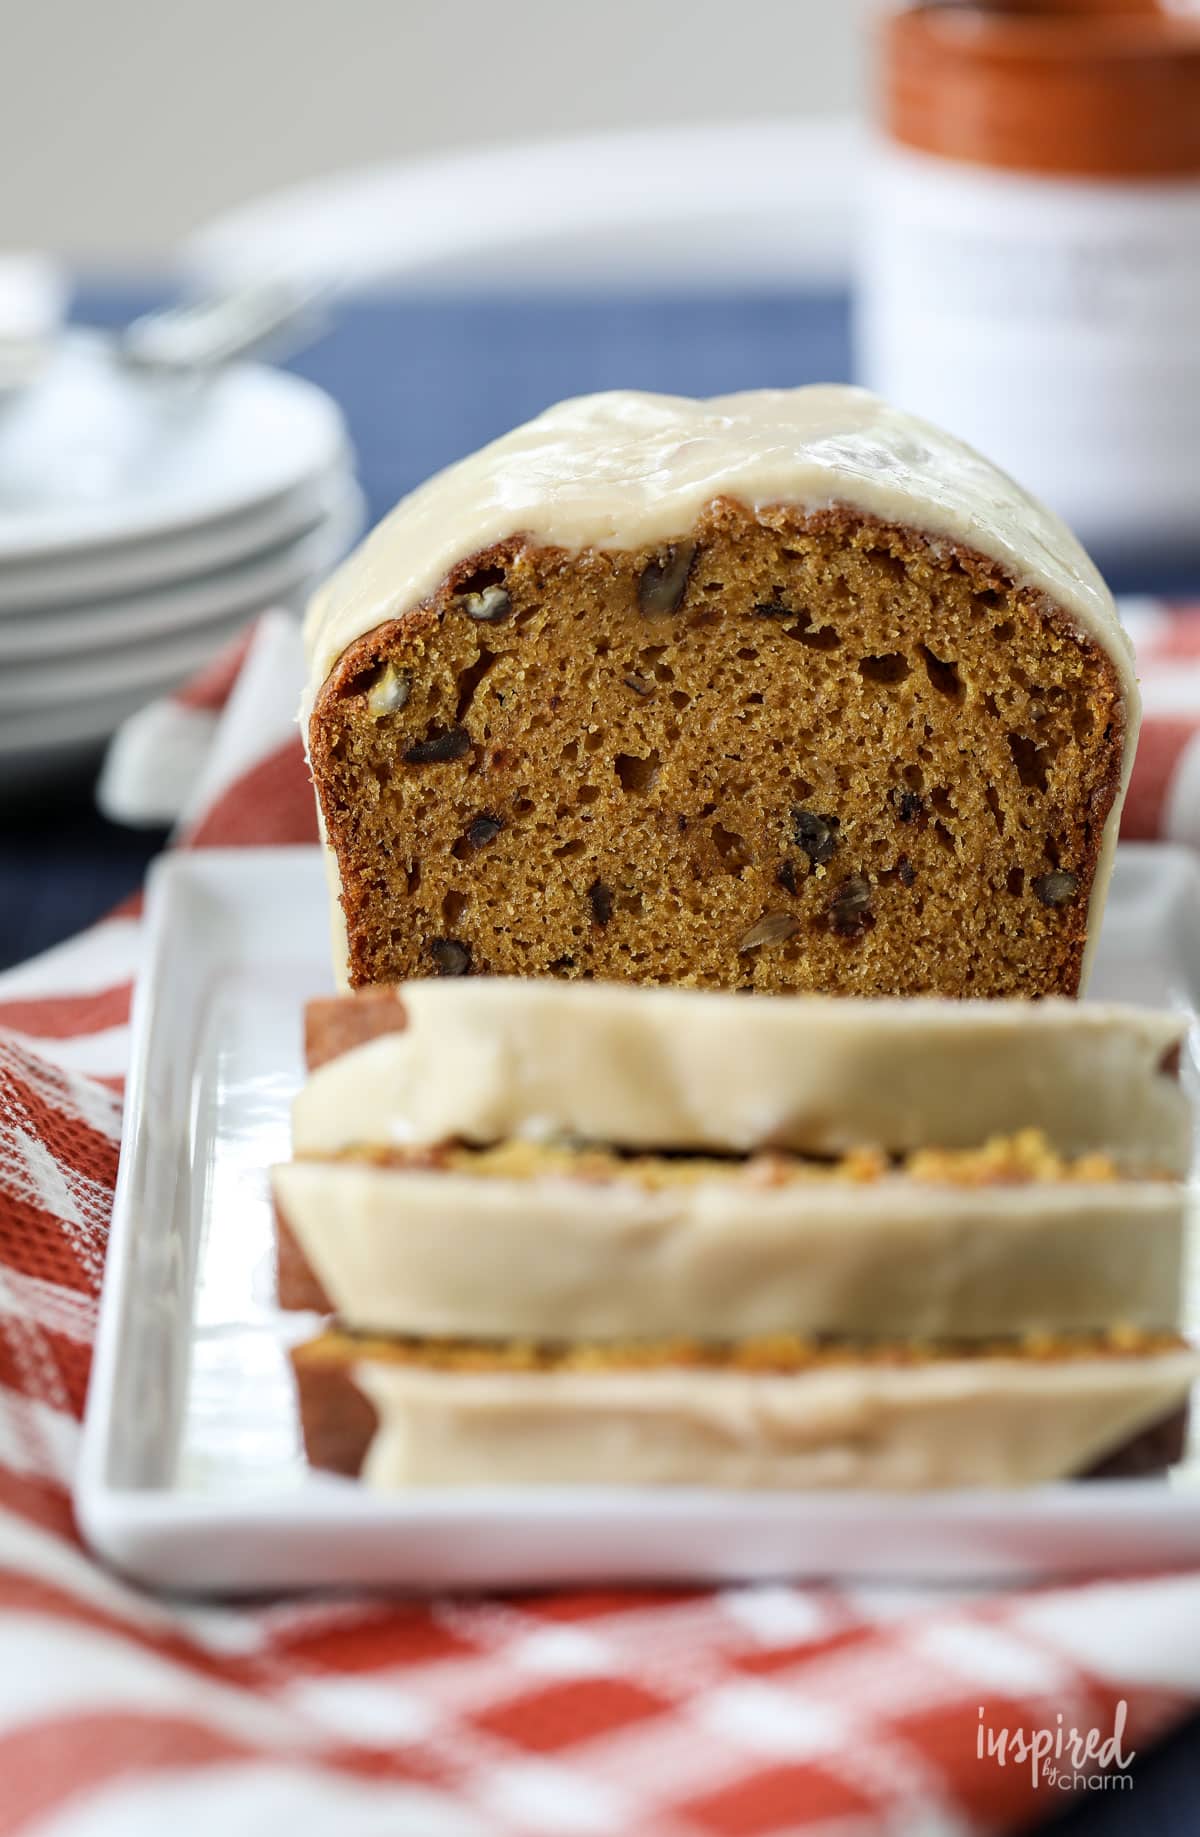 This Really Good Pumpkin Bread recipe is a delicious fall dessert recipe. #pumpkin #bread #recipe #pumpkin #spice #fallbaking #dessert #loaf